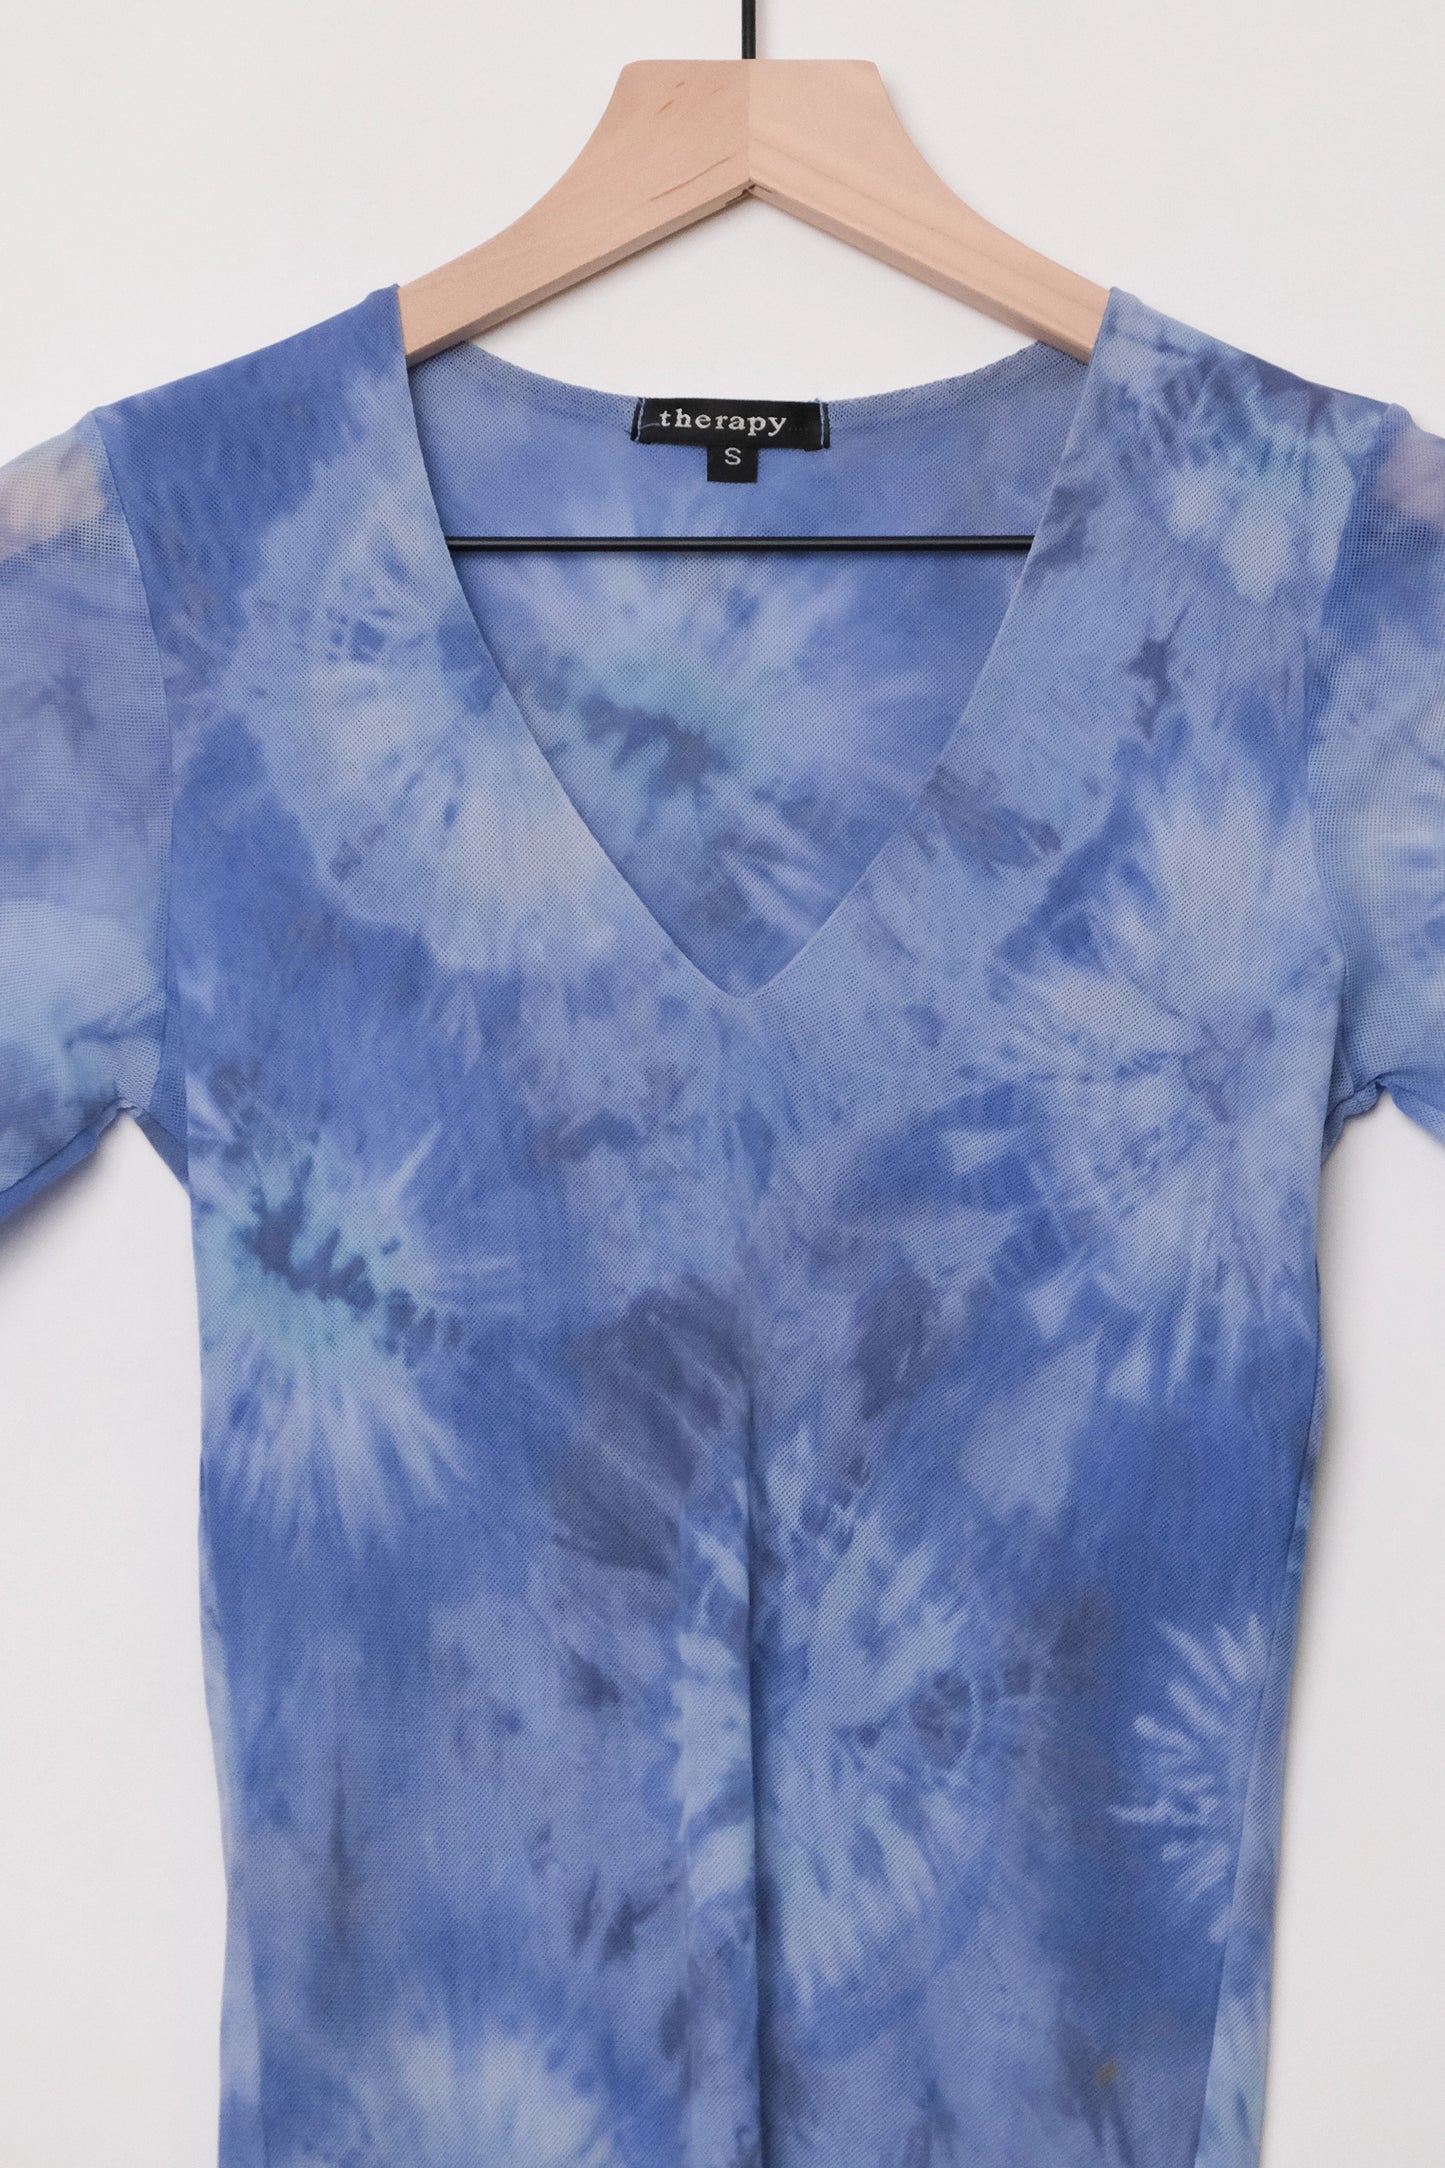 Rave Mesh Top Blue Tie Dye US 6 S/M, 90's Therapy 1/2 Sleeve